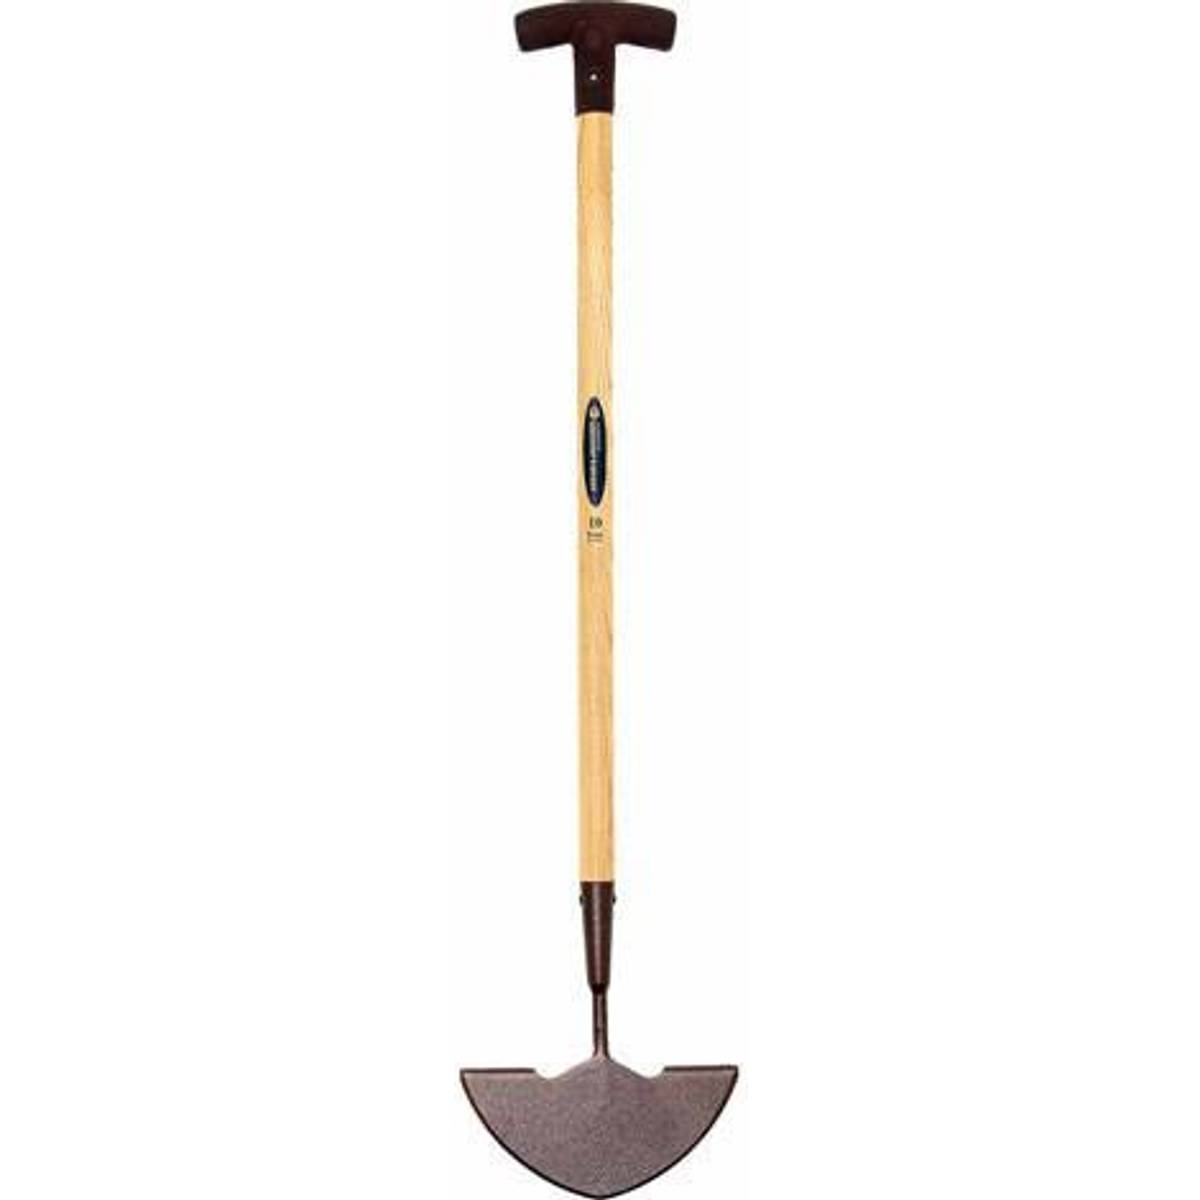 Spear & Jackson Garden Tools (100+ products) • See lowest price now